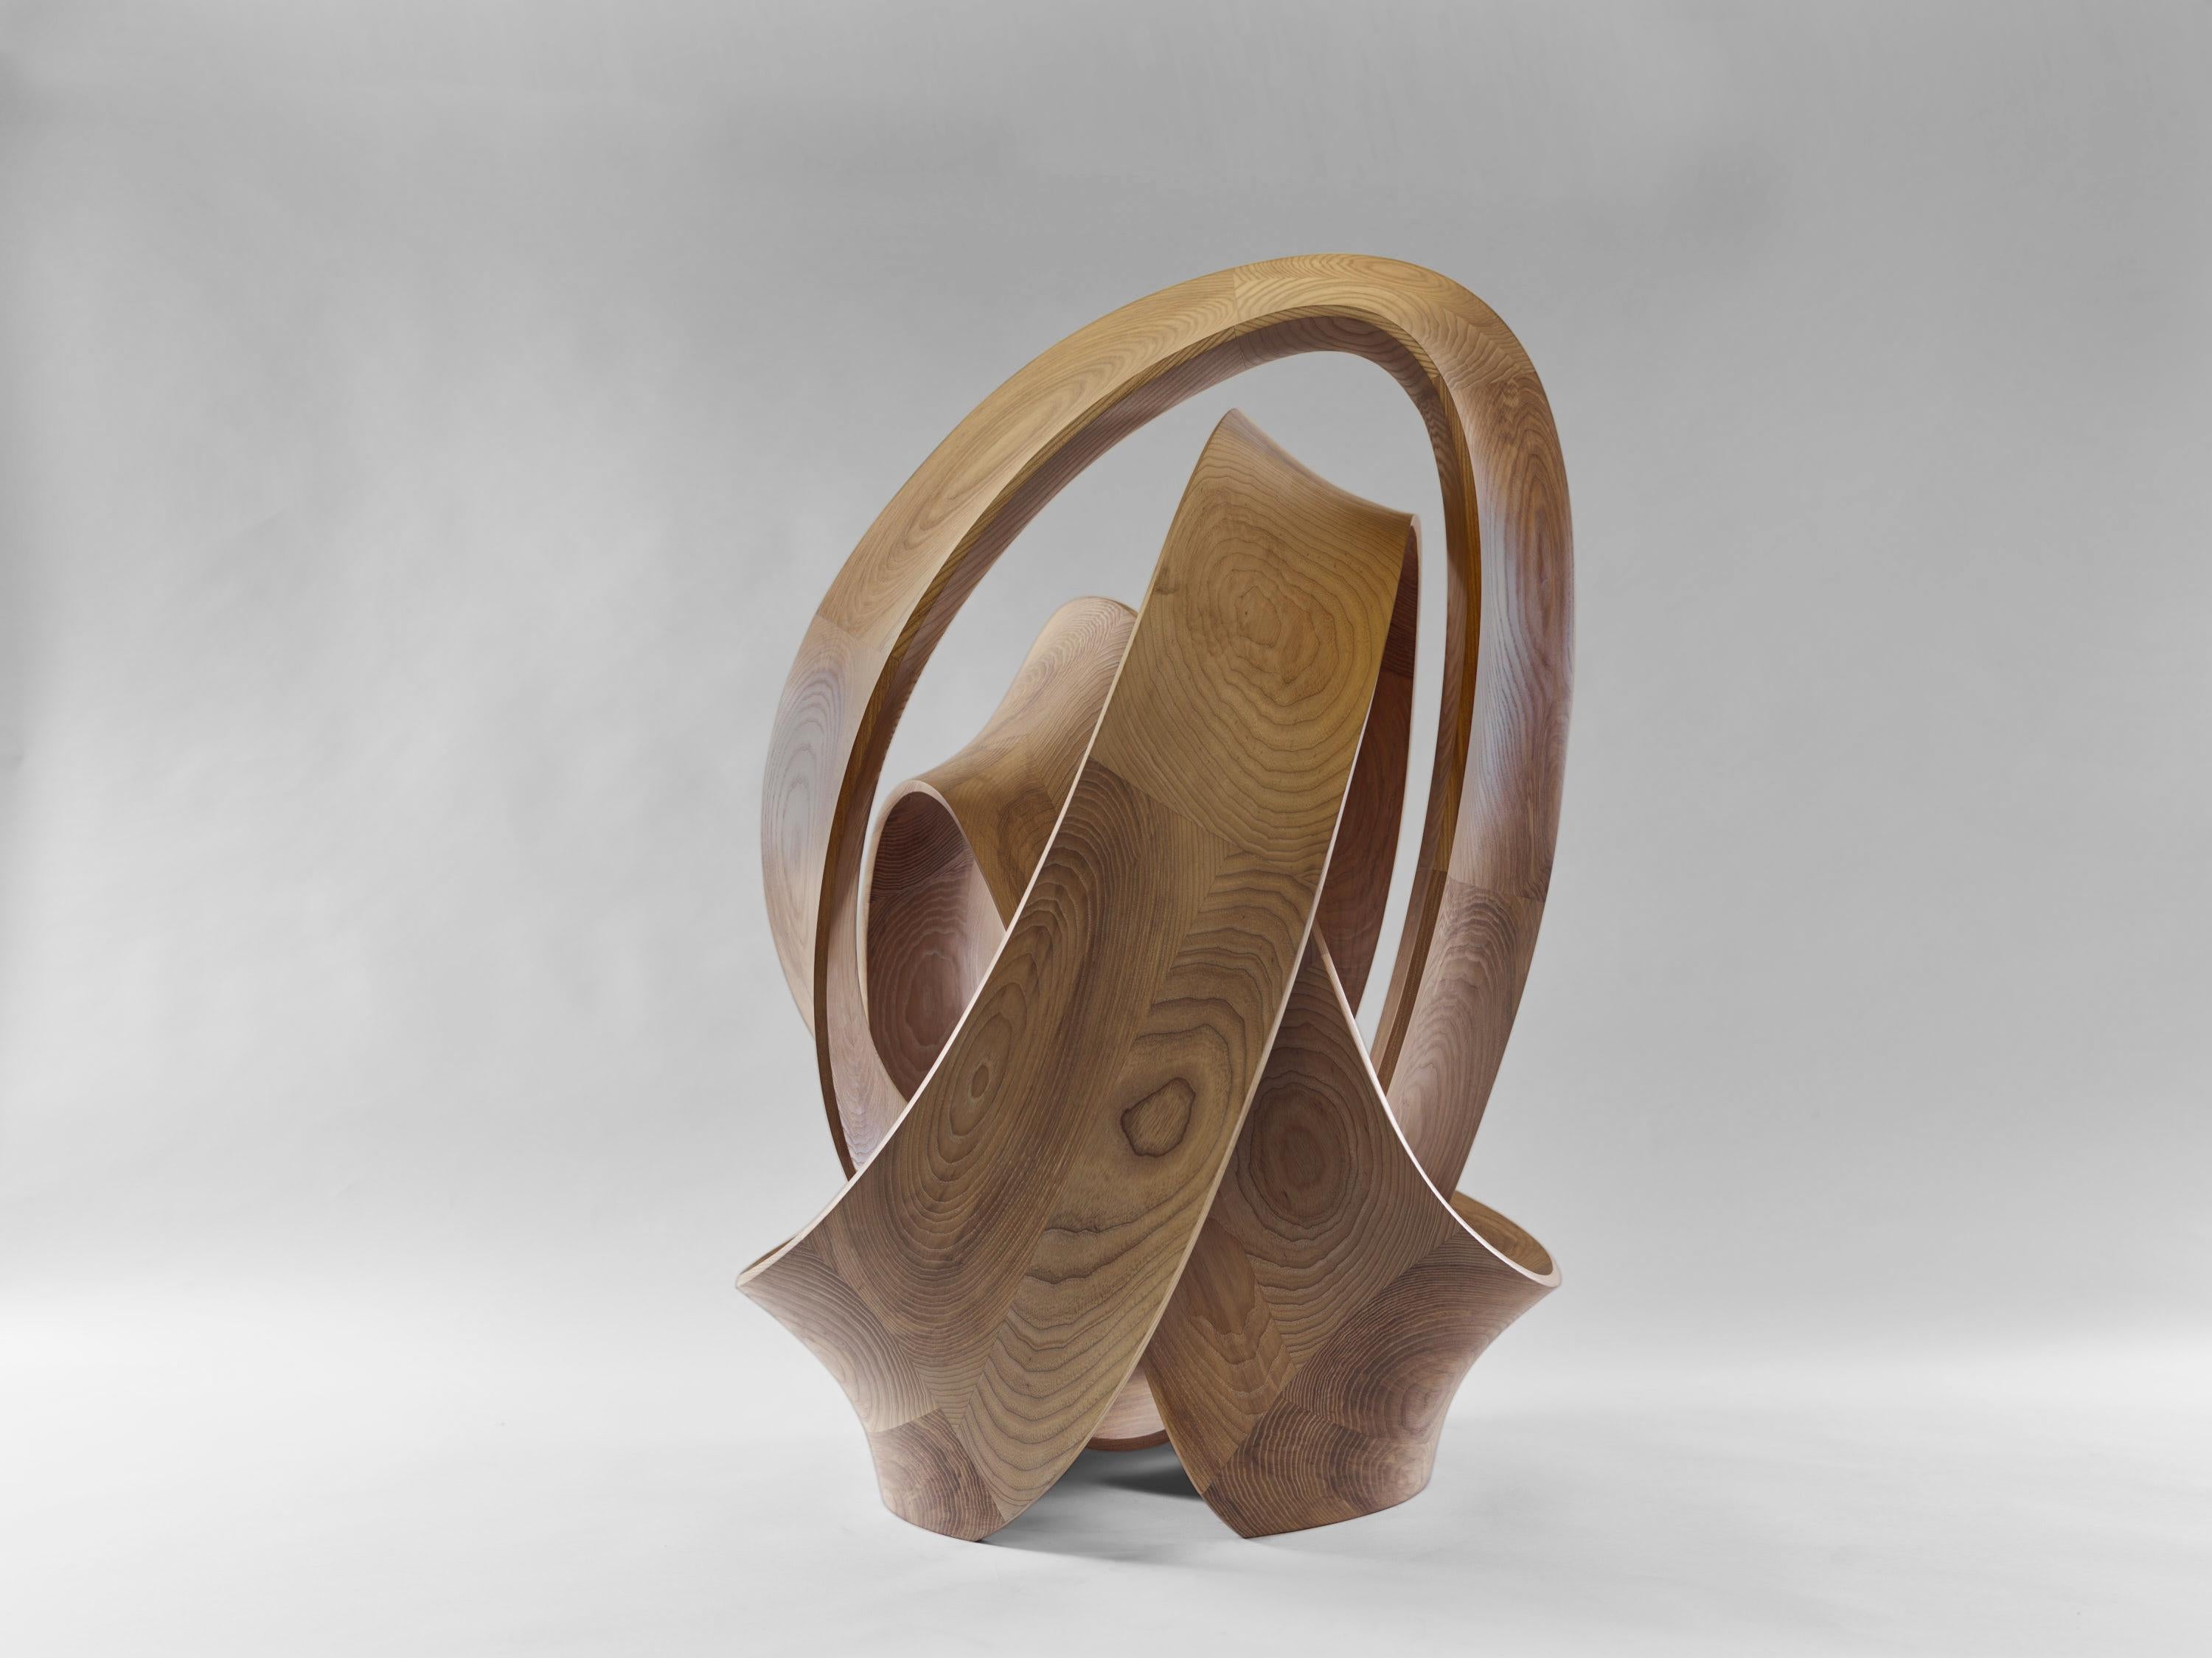 The 'Knot sculpture' by British designer-maker, Tom Vaughan, is hand-carved from natural or ebonized ash. Standing just over a metre high, It is part of a series of work tracing three-dimensional paths of movement through a solid, functional form,